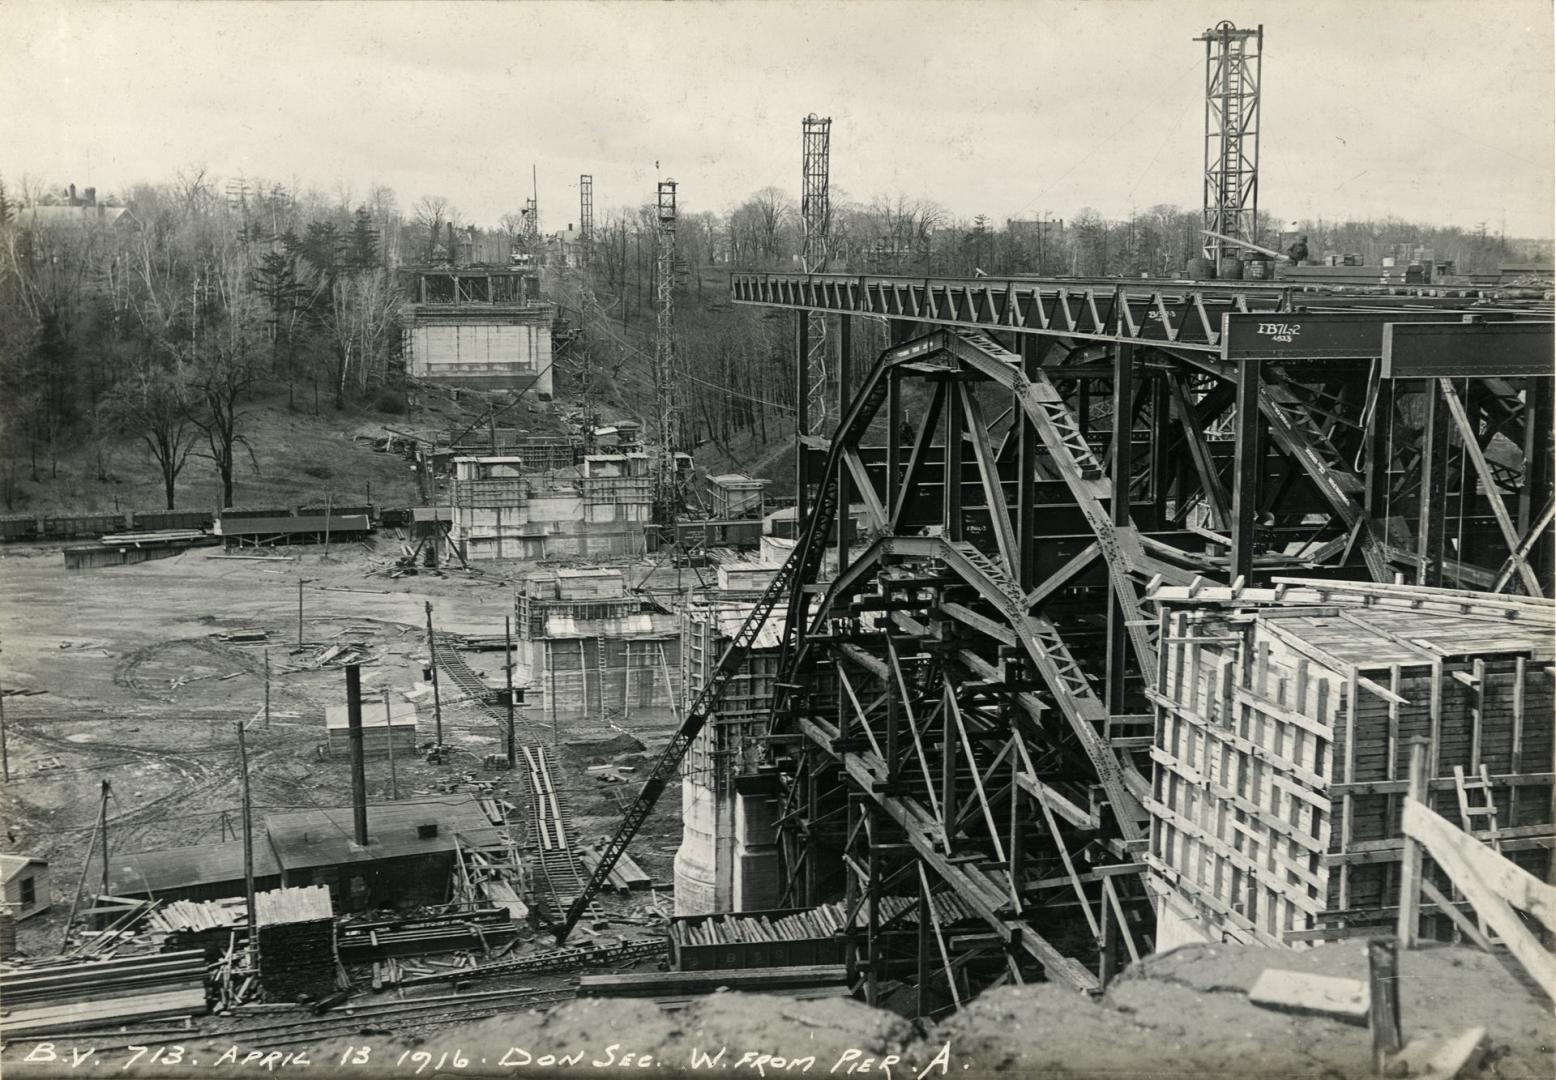 Bloor Street Viaduct under construction, west from Pier A, Apr